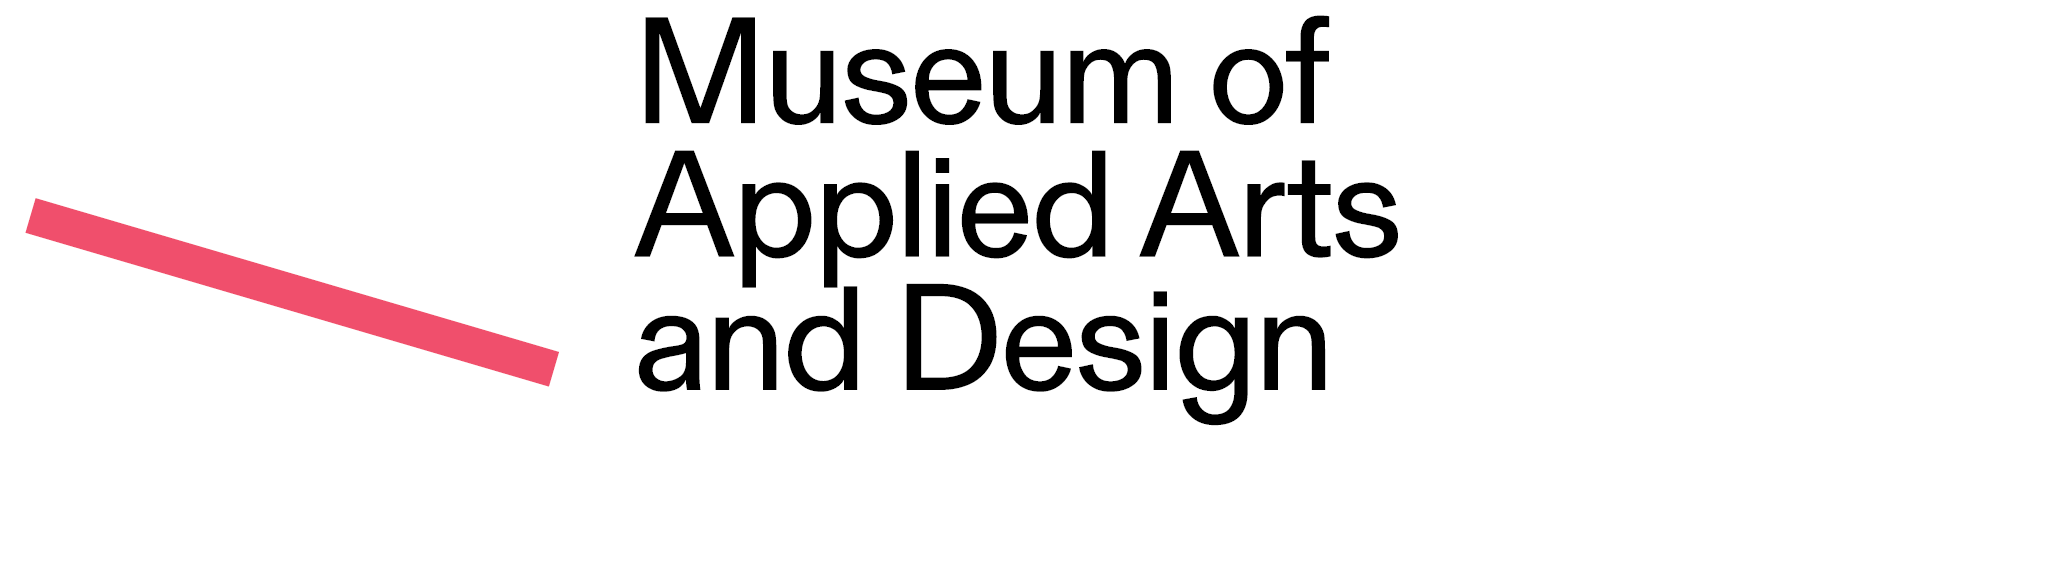 Museum of Applied Arts and Design